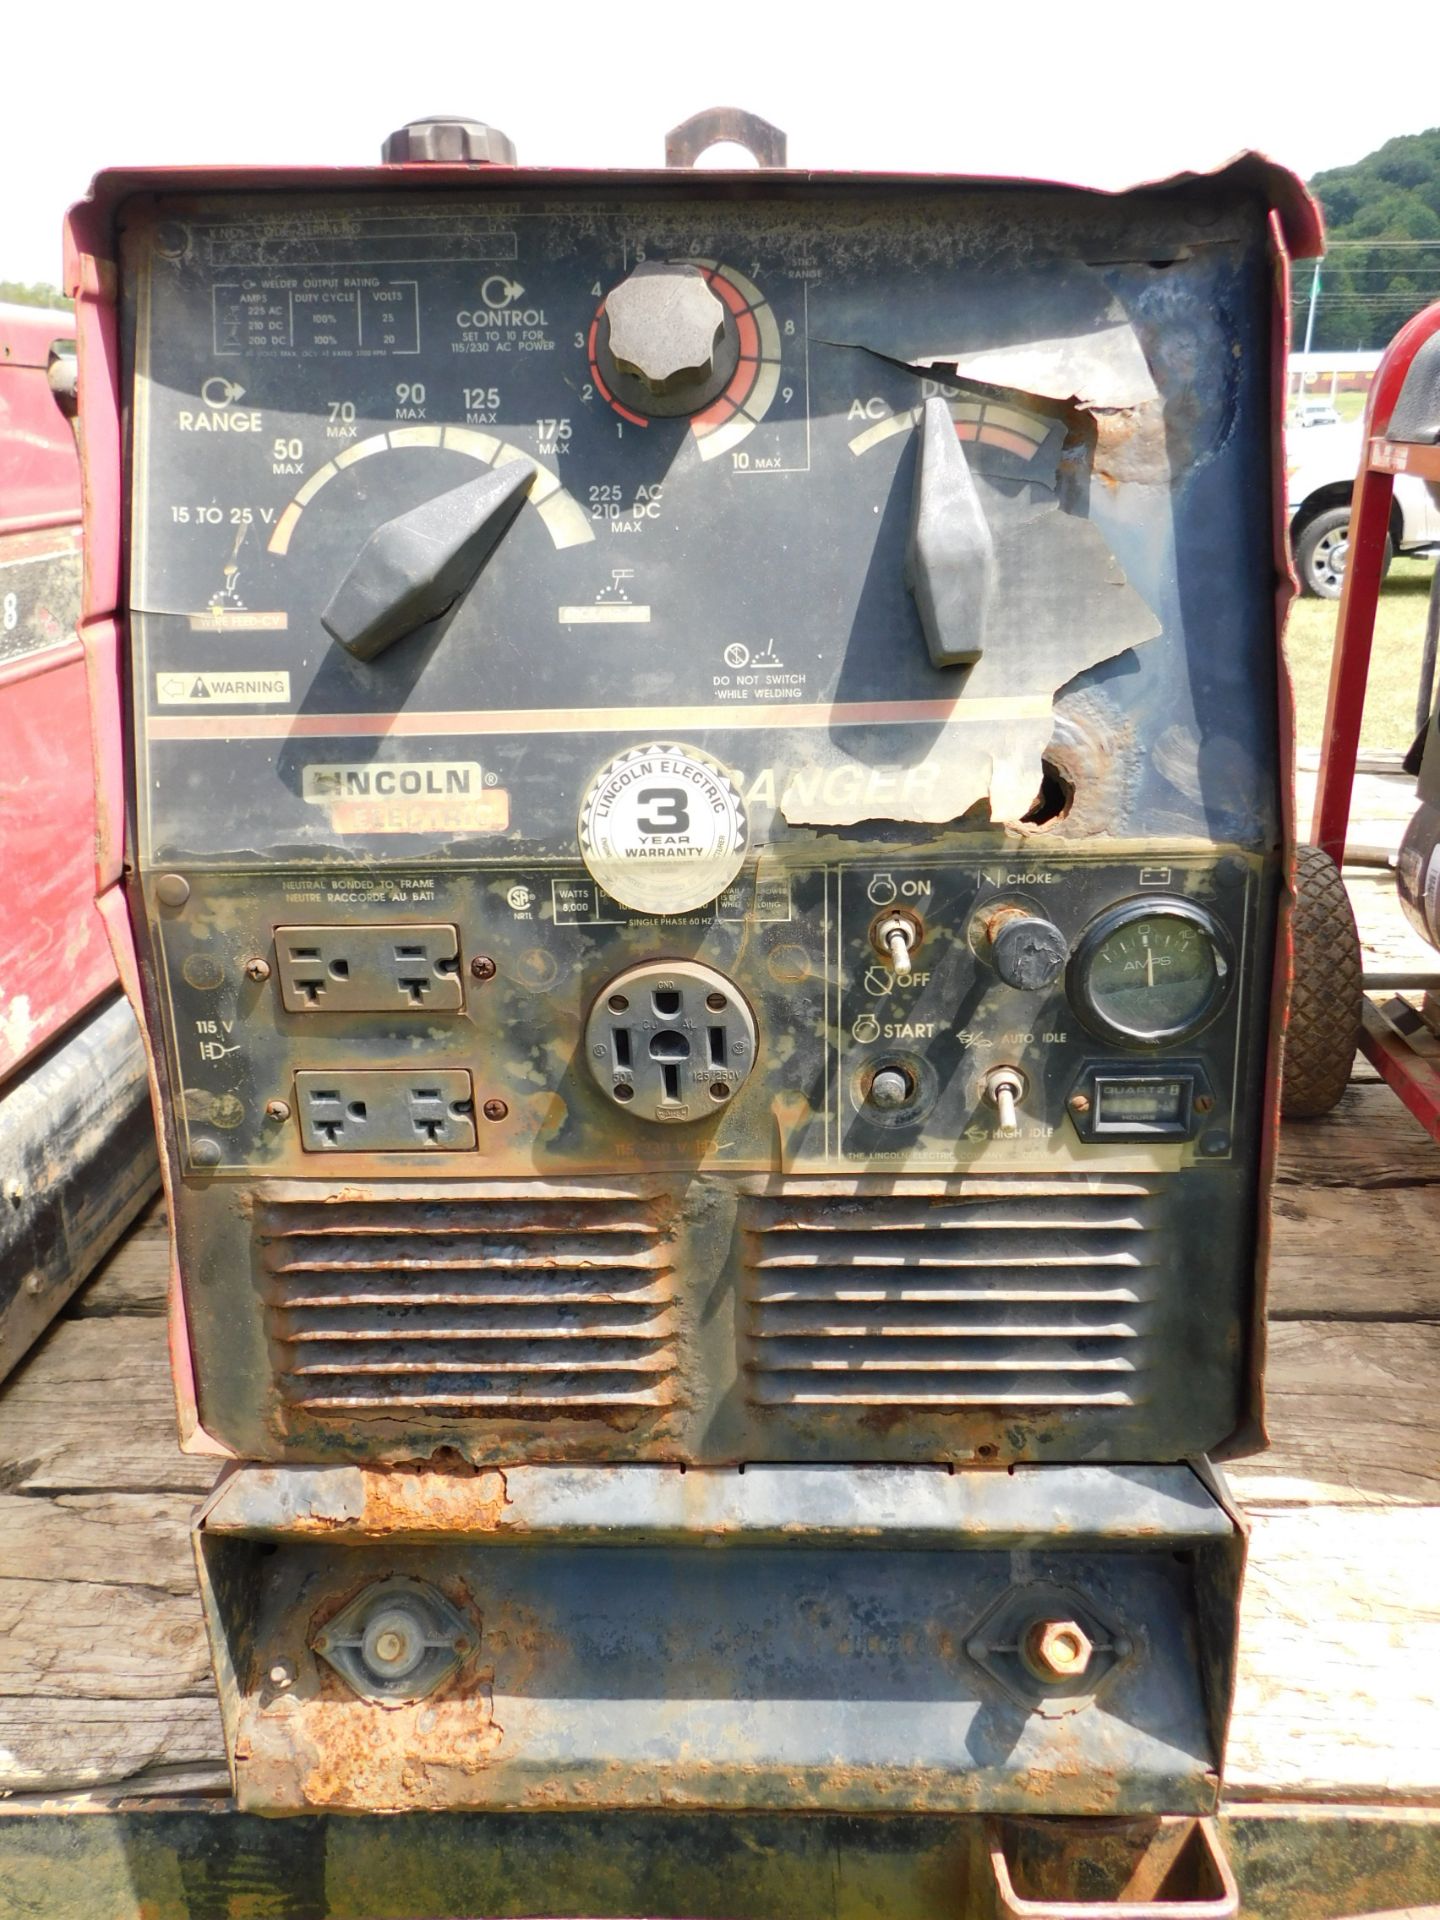 Lincoln Ranger 8 Gas-Powered Welder/Generator, SN NA, 865 hours, Not in Running Condition - Image 2 of 8